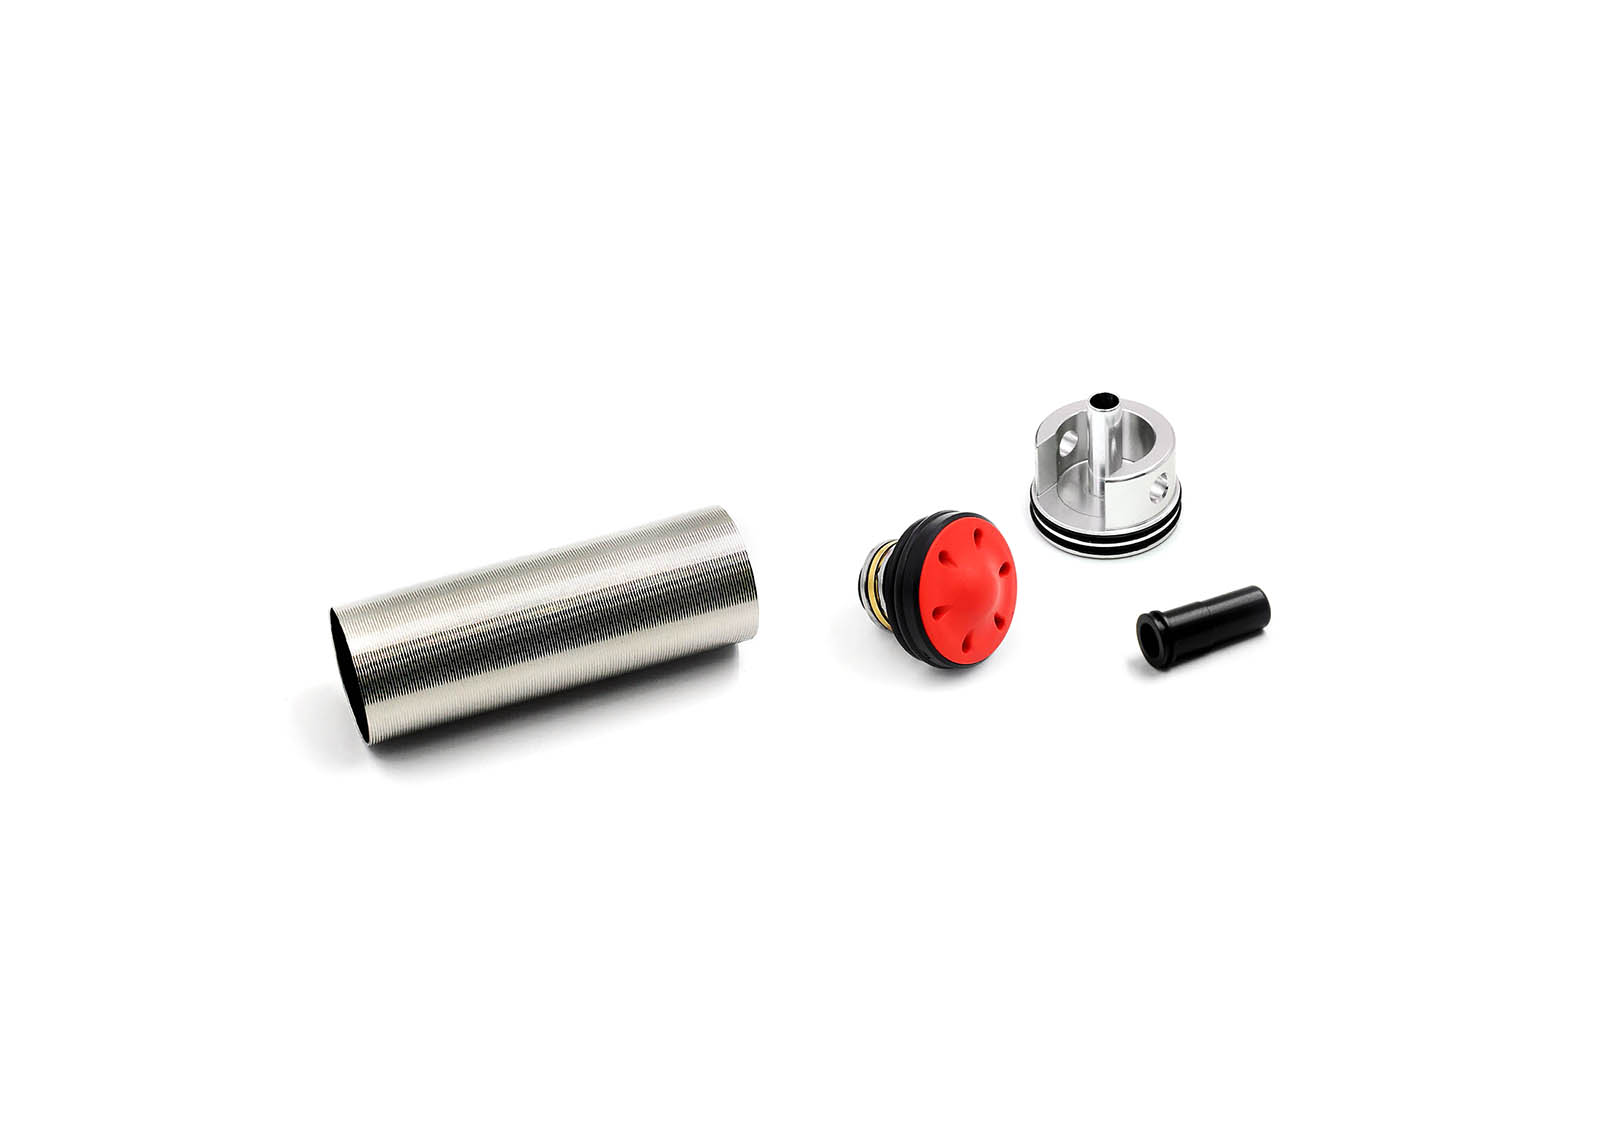 Bore-Up Cylinder Set for G3-A3/A4/SG1 (CA Type) - Modify AEG Airsoft parts